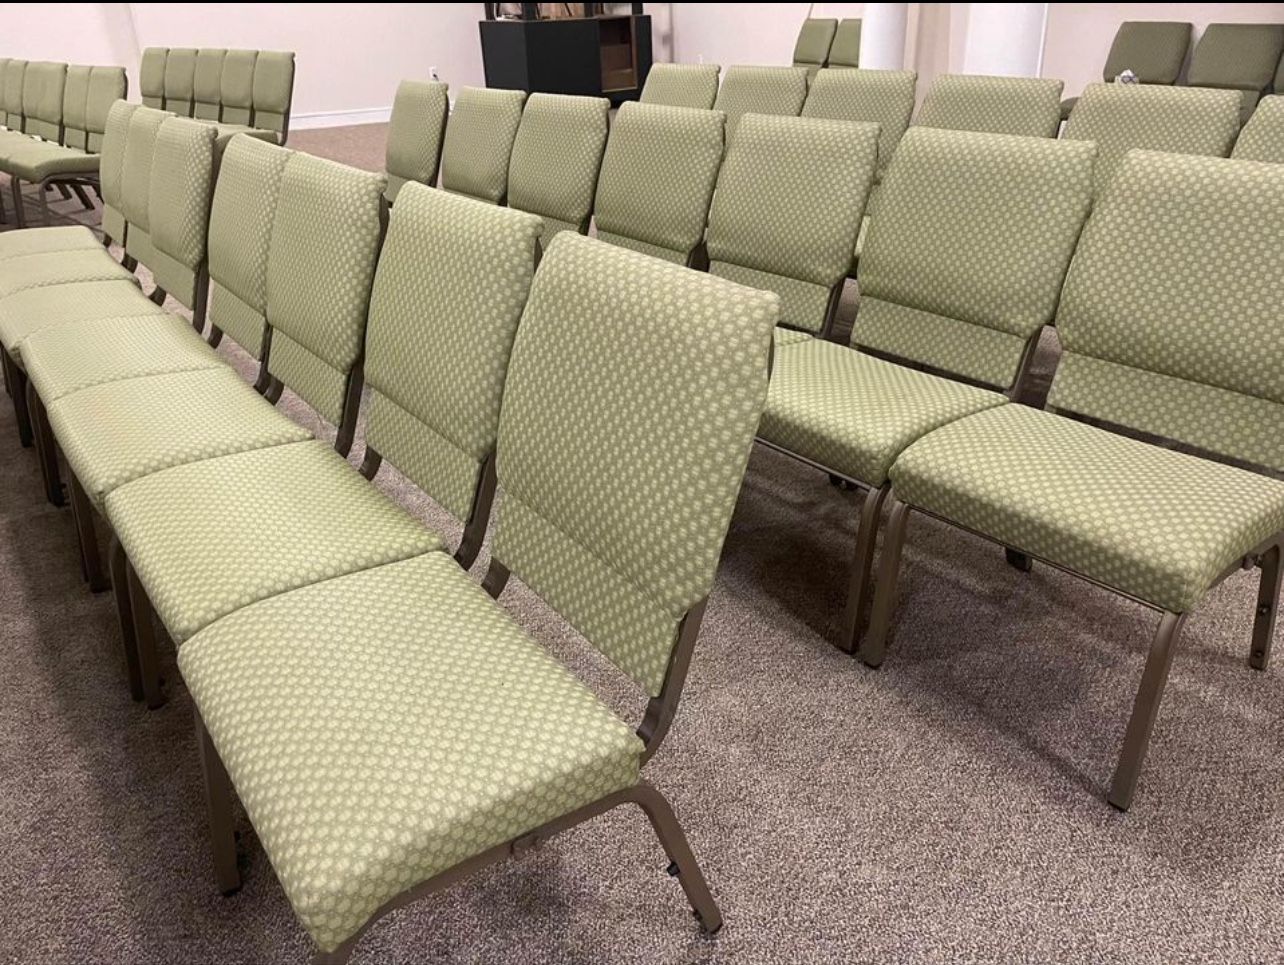 Chairs- Deluxe (good for church, conference room, office, etc)